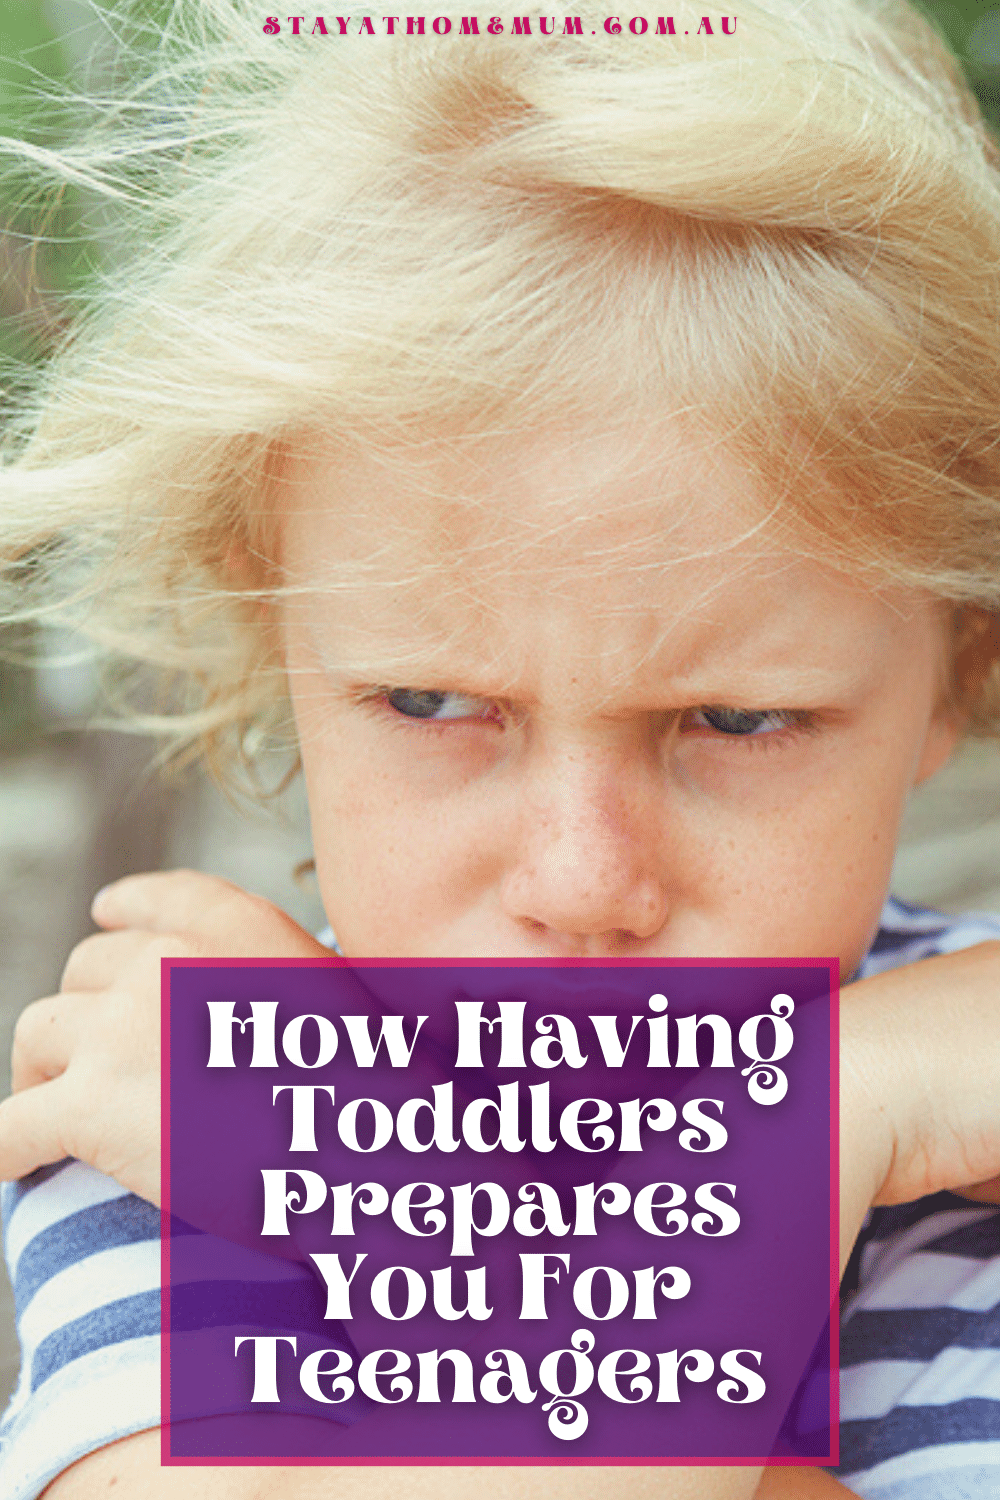 How Having Toddlers Prepares You For Teenagers | Stay at Home Mum.com.au